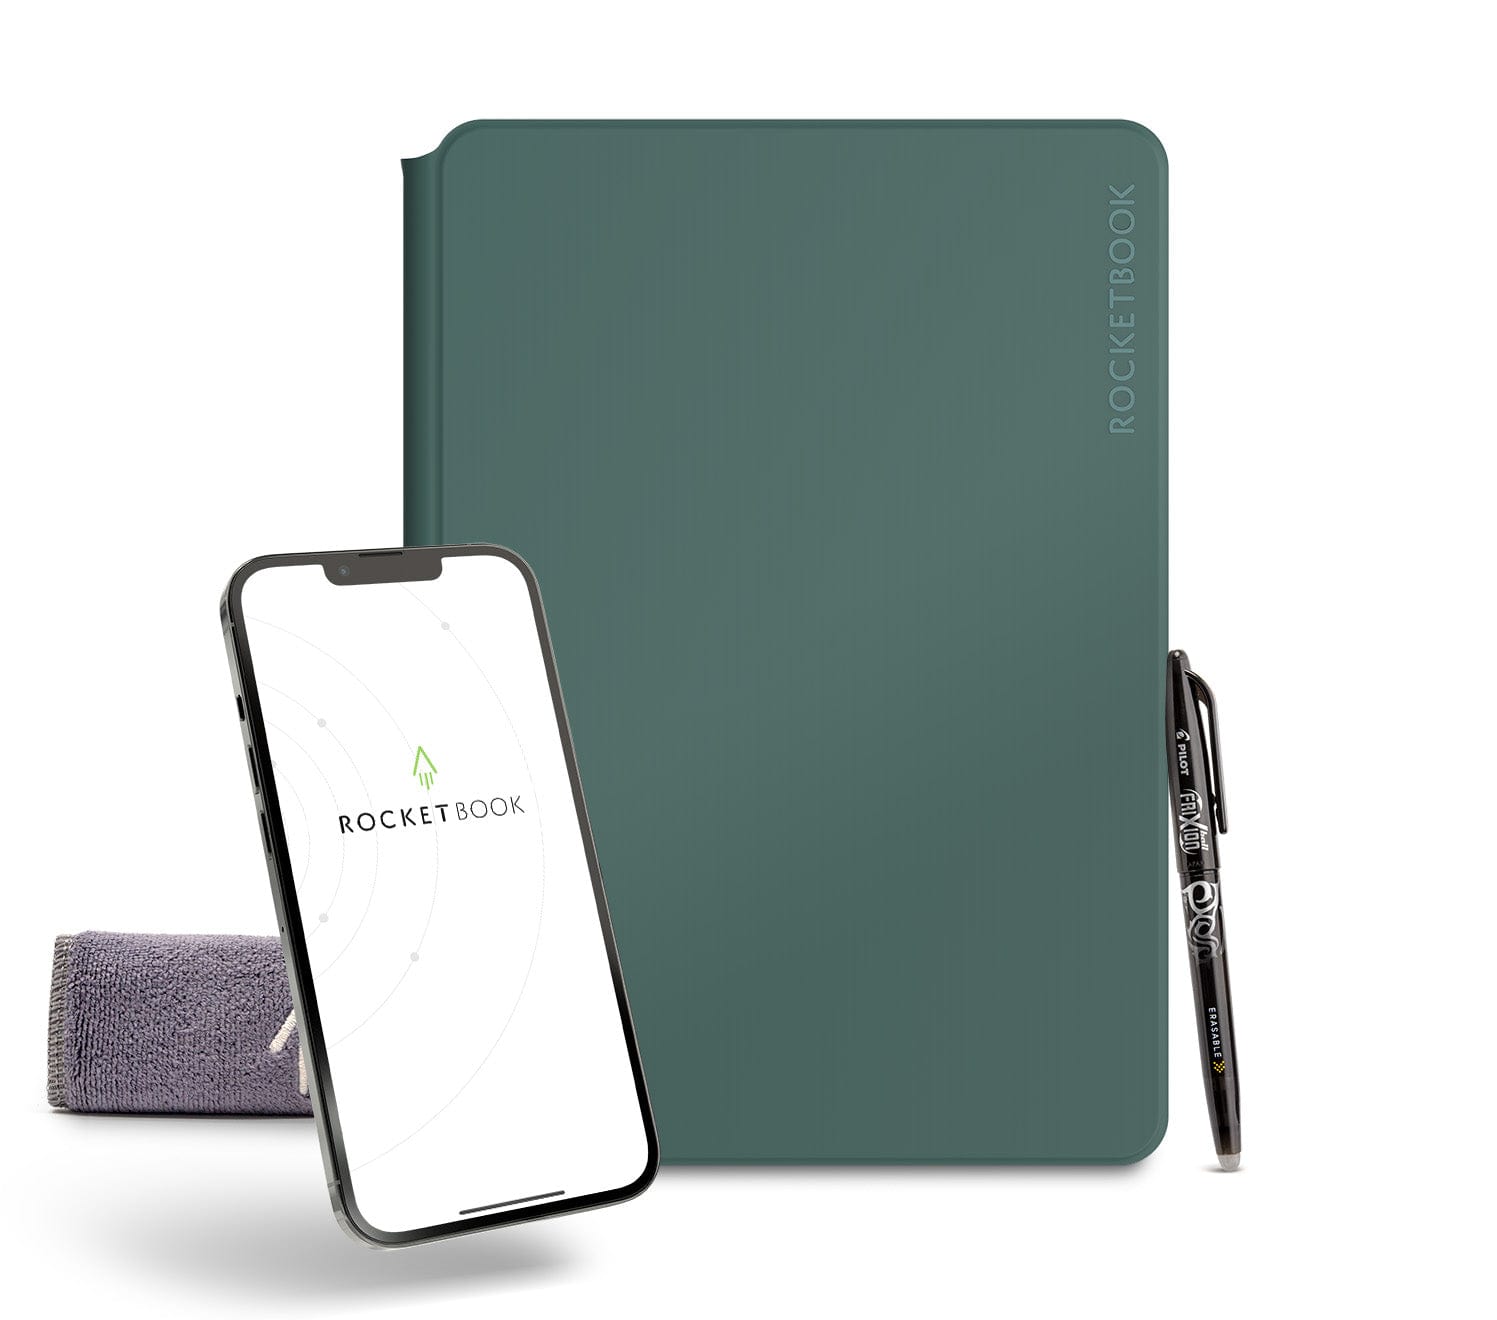 Professional Notebook, Reusable & Eco-Friendly